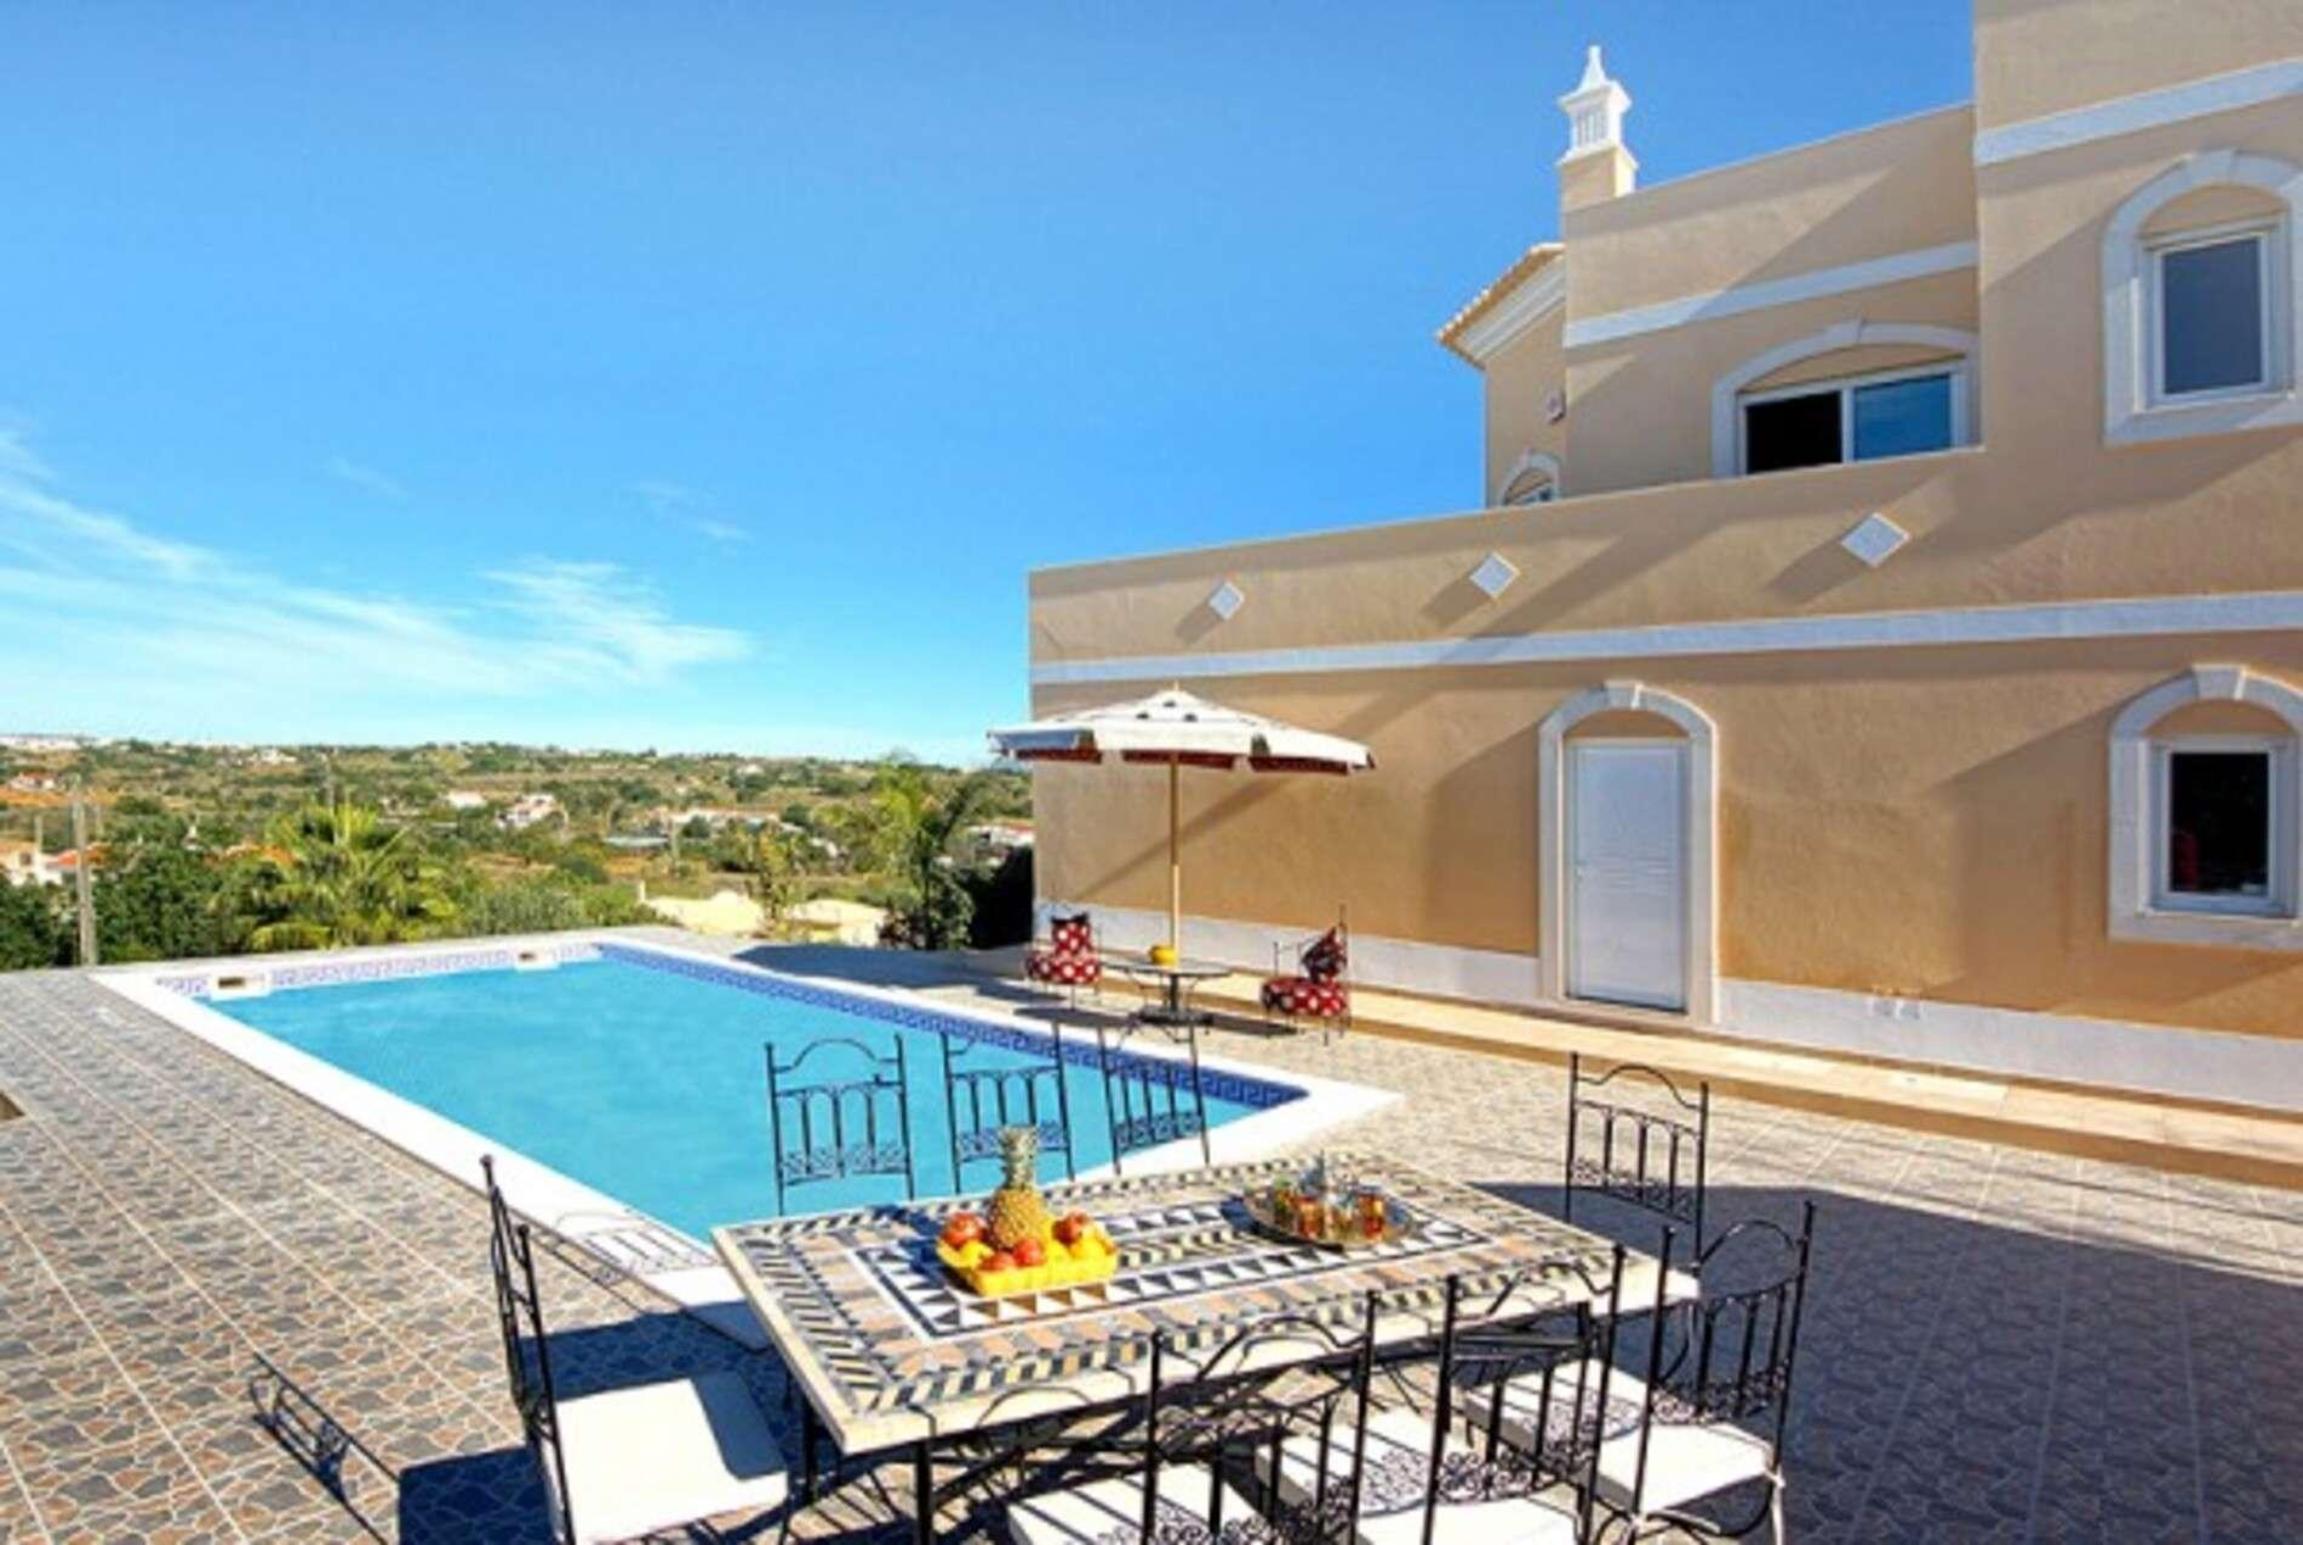 Property Image 1 - Villa offers a large pool and comfortable interior